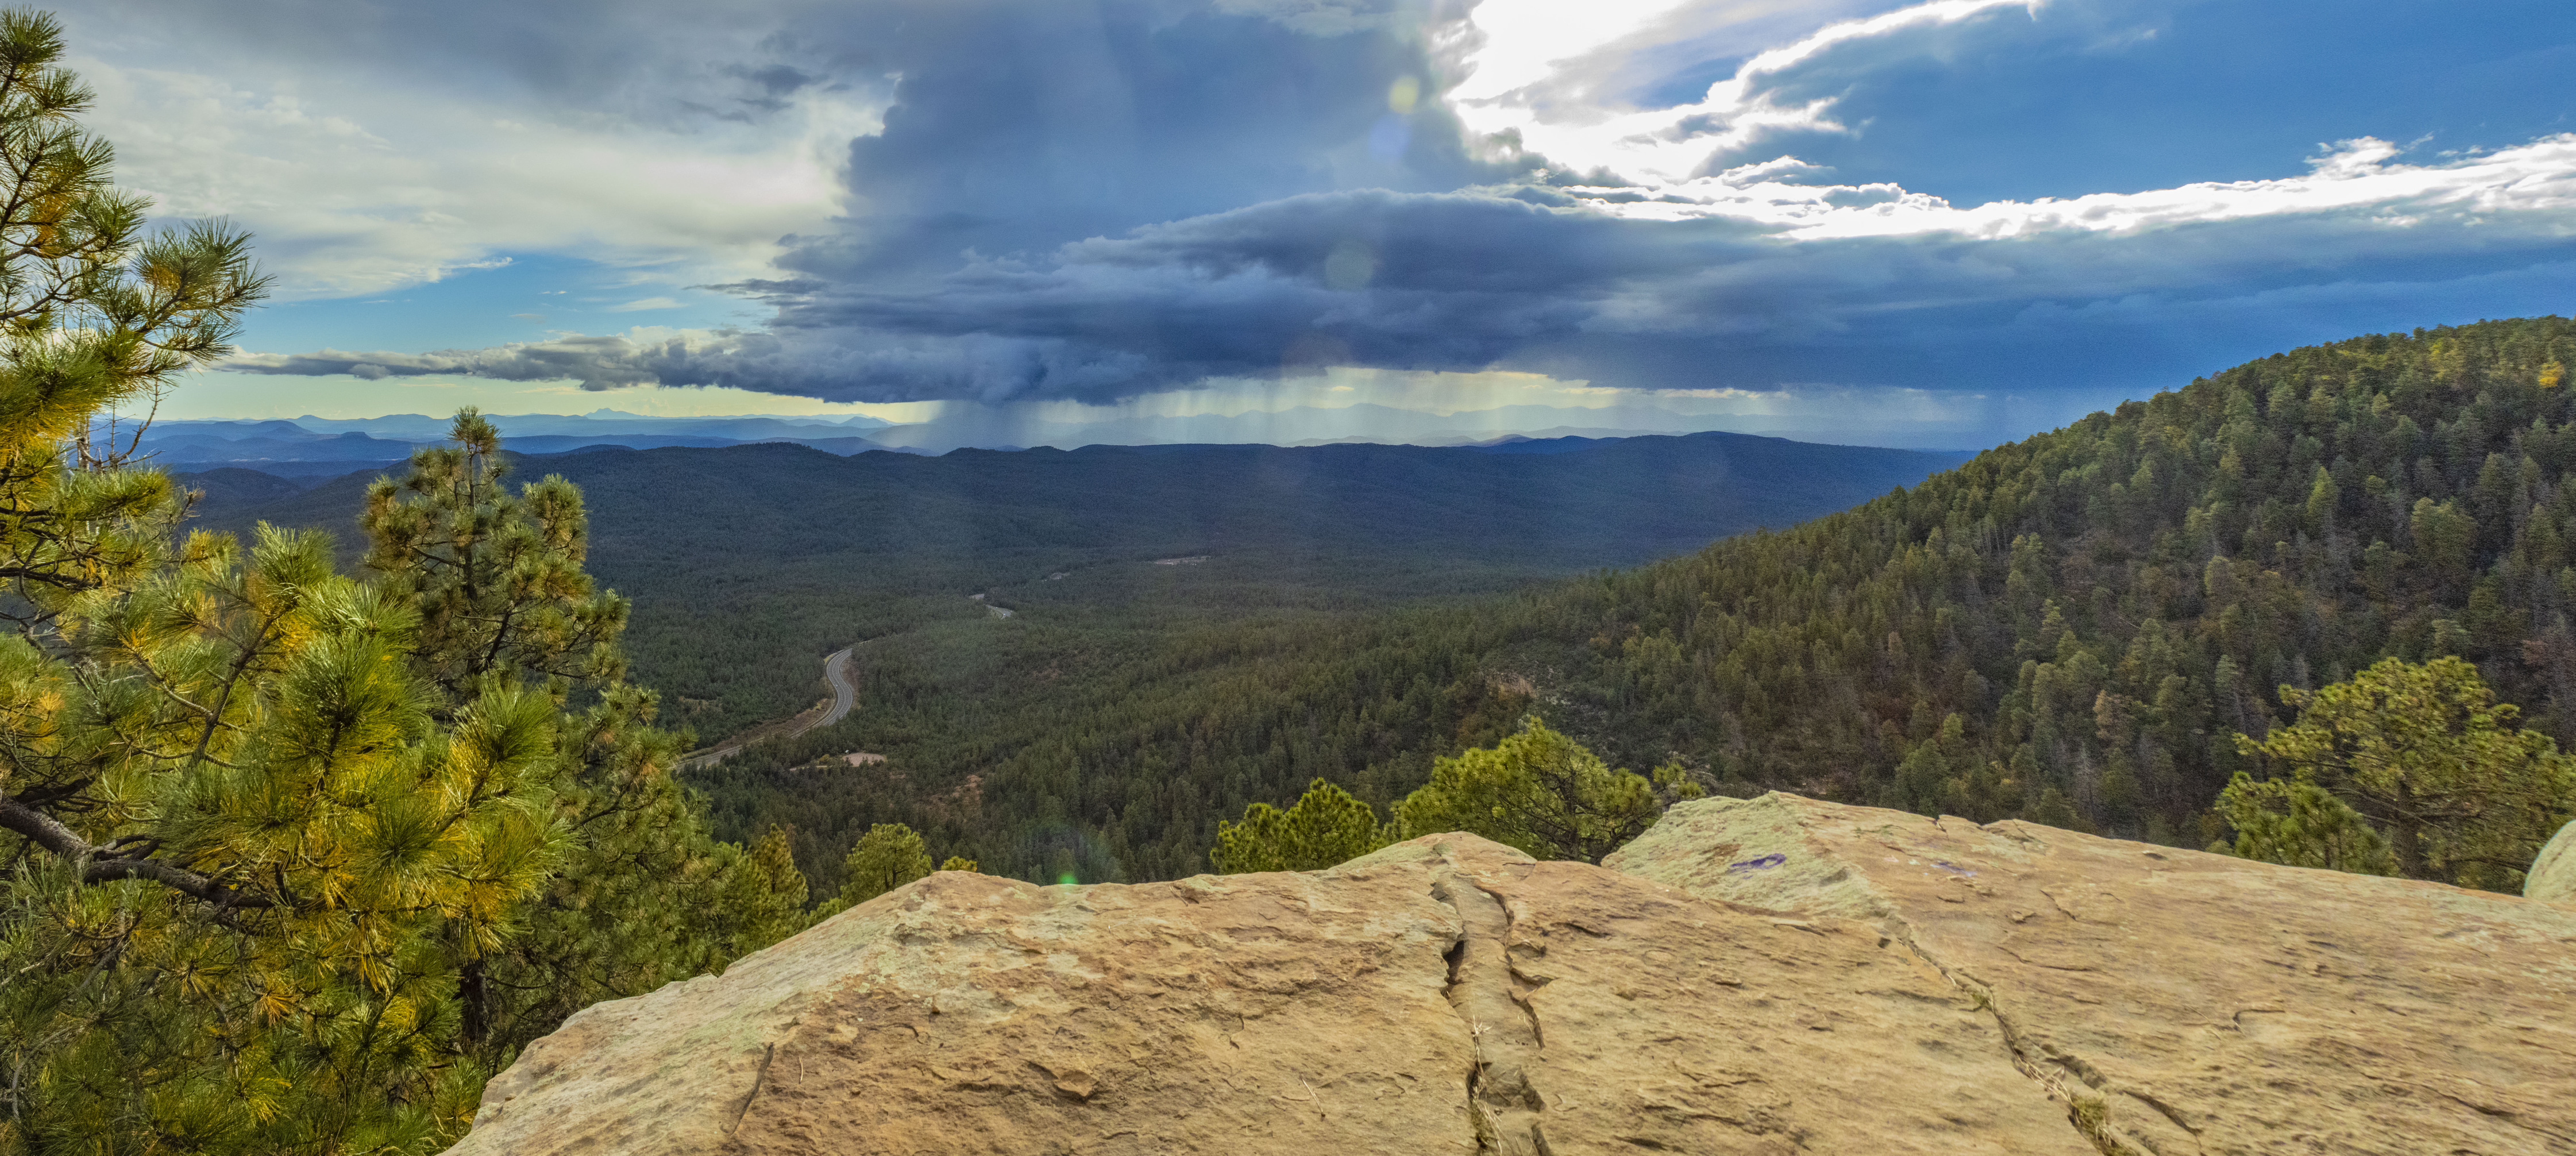 Photo by Kaylee Morello  |  This is a Panoramic Image of a Cliff in Prescott Arizona with a beautiful view of a huge rain cloud pouring down in the distance.